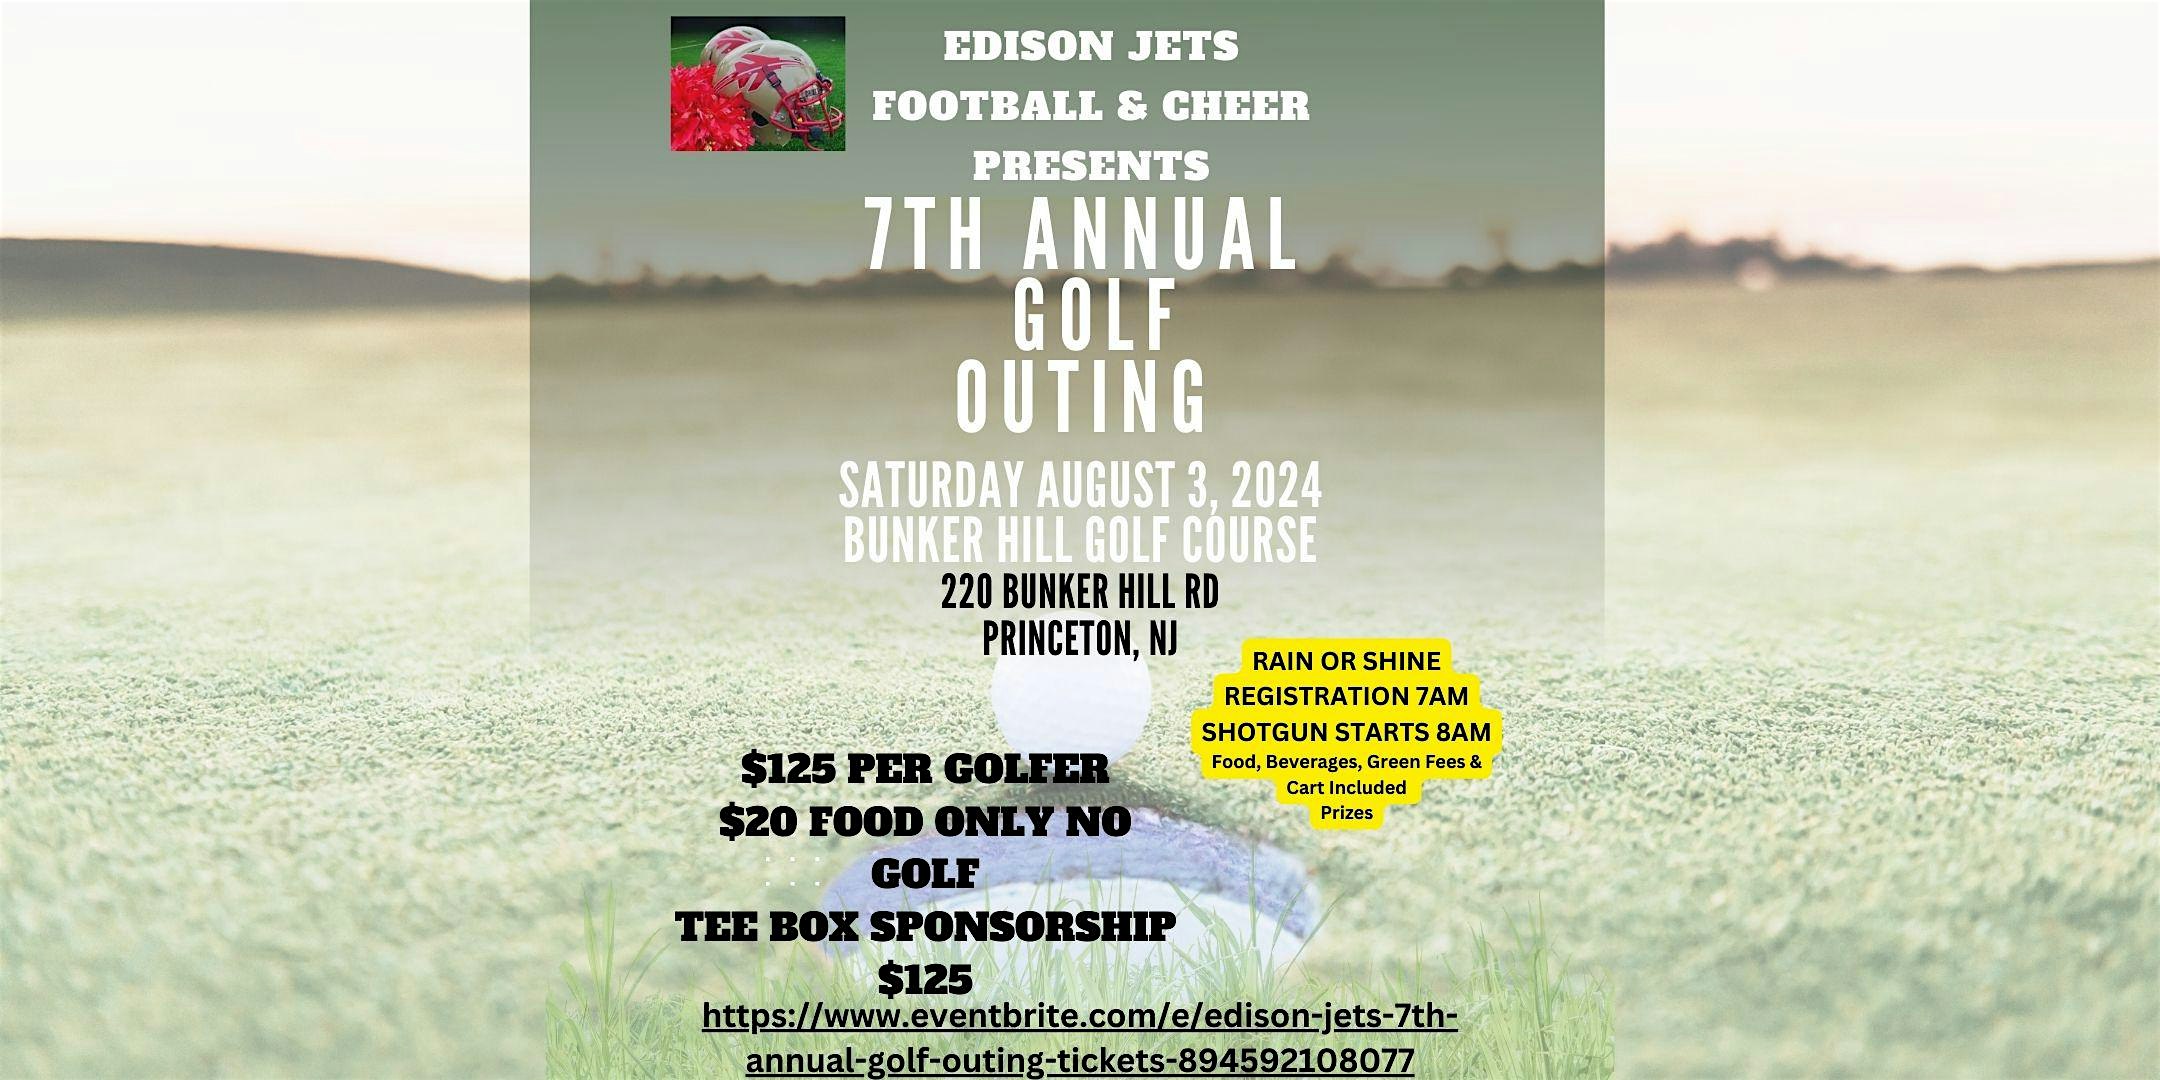 Edison Jets 7th Annual Golf Outing